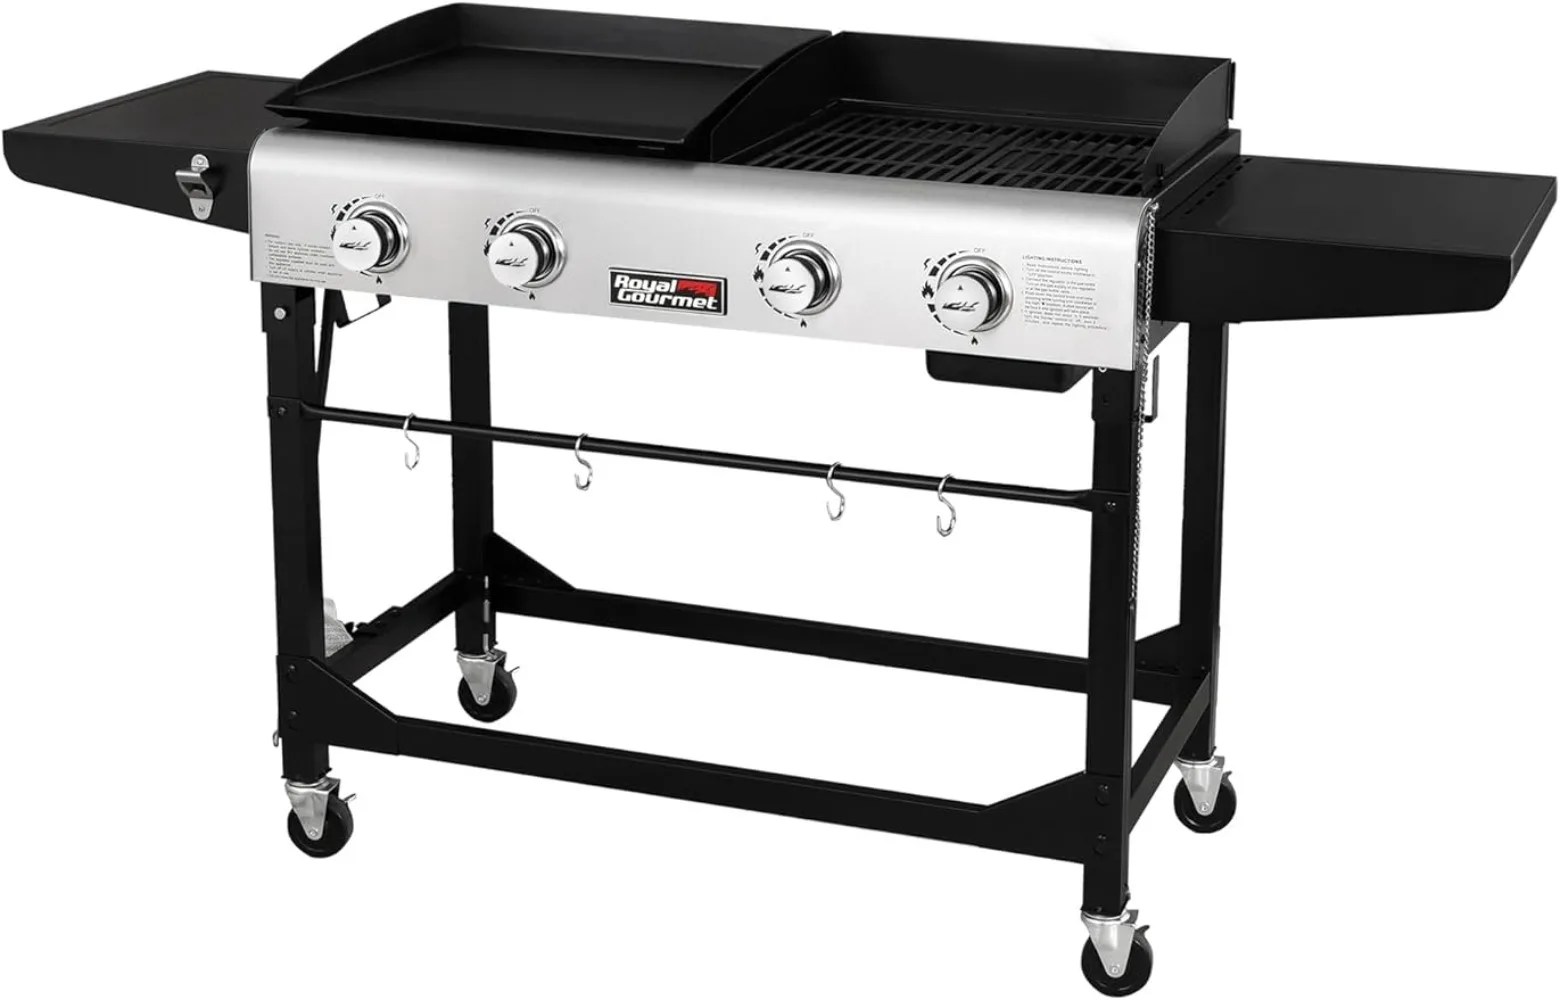 

GD401 Portable Propane Gas Grill and Griddle Combo with Side Table | 4-Burner, Folding Legs,Versatile, Outdoor | Black 66 Inch